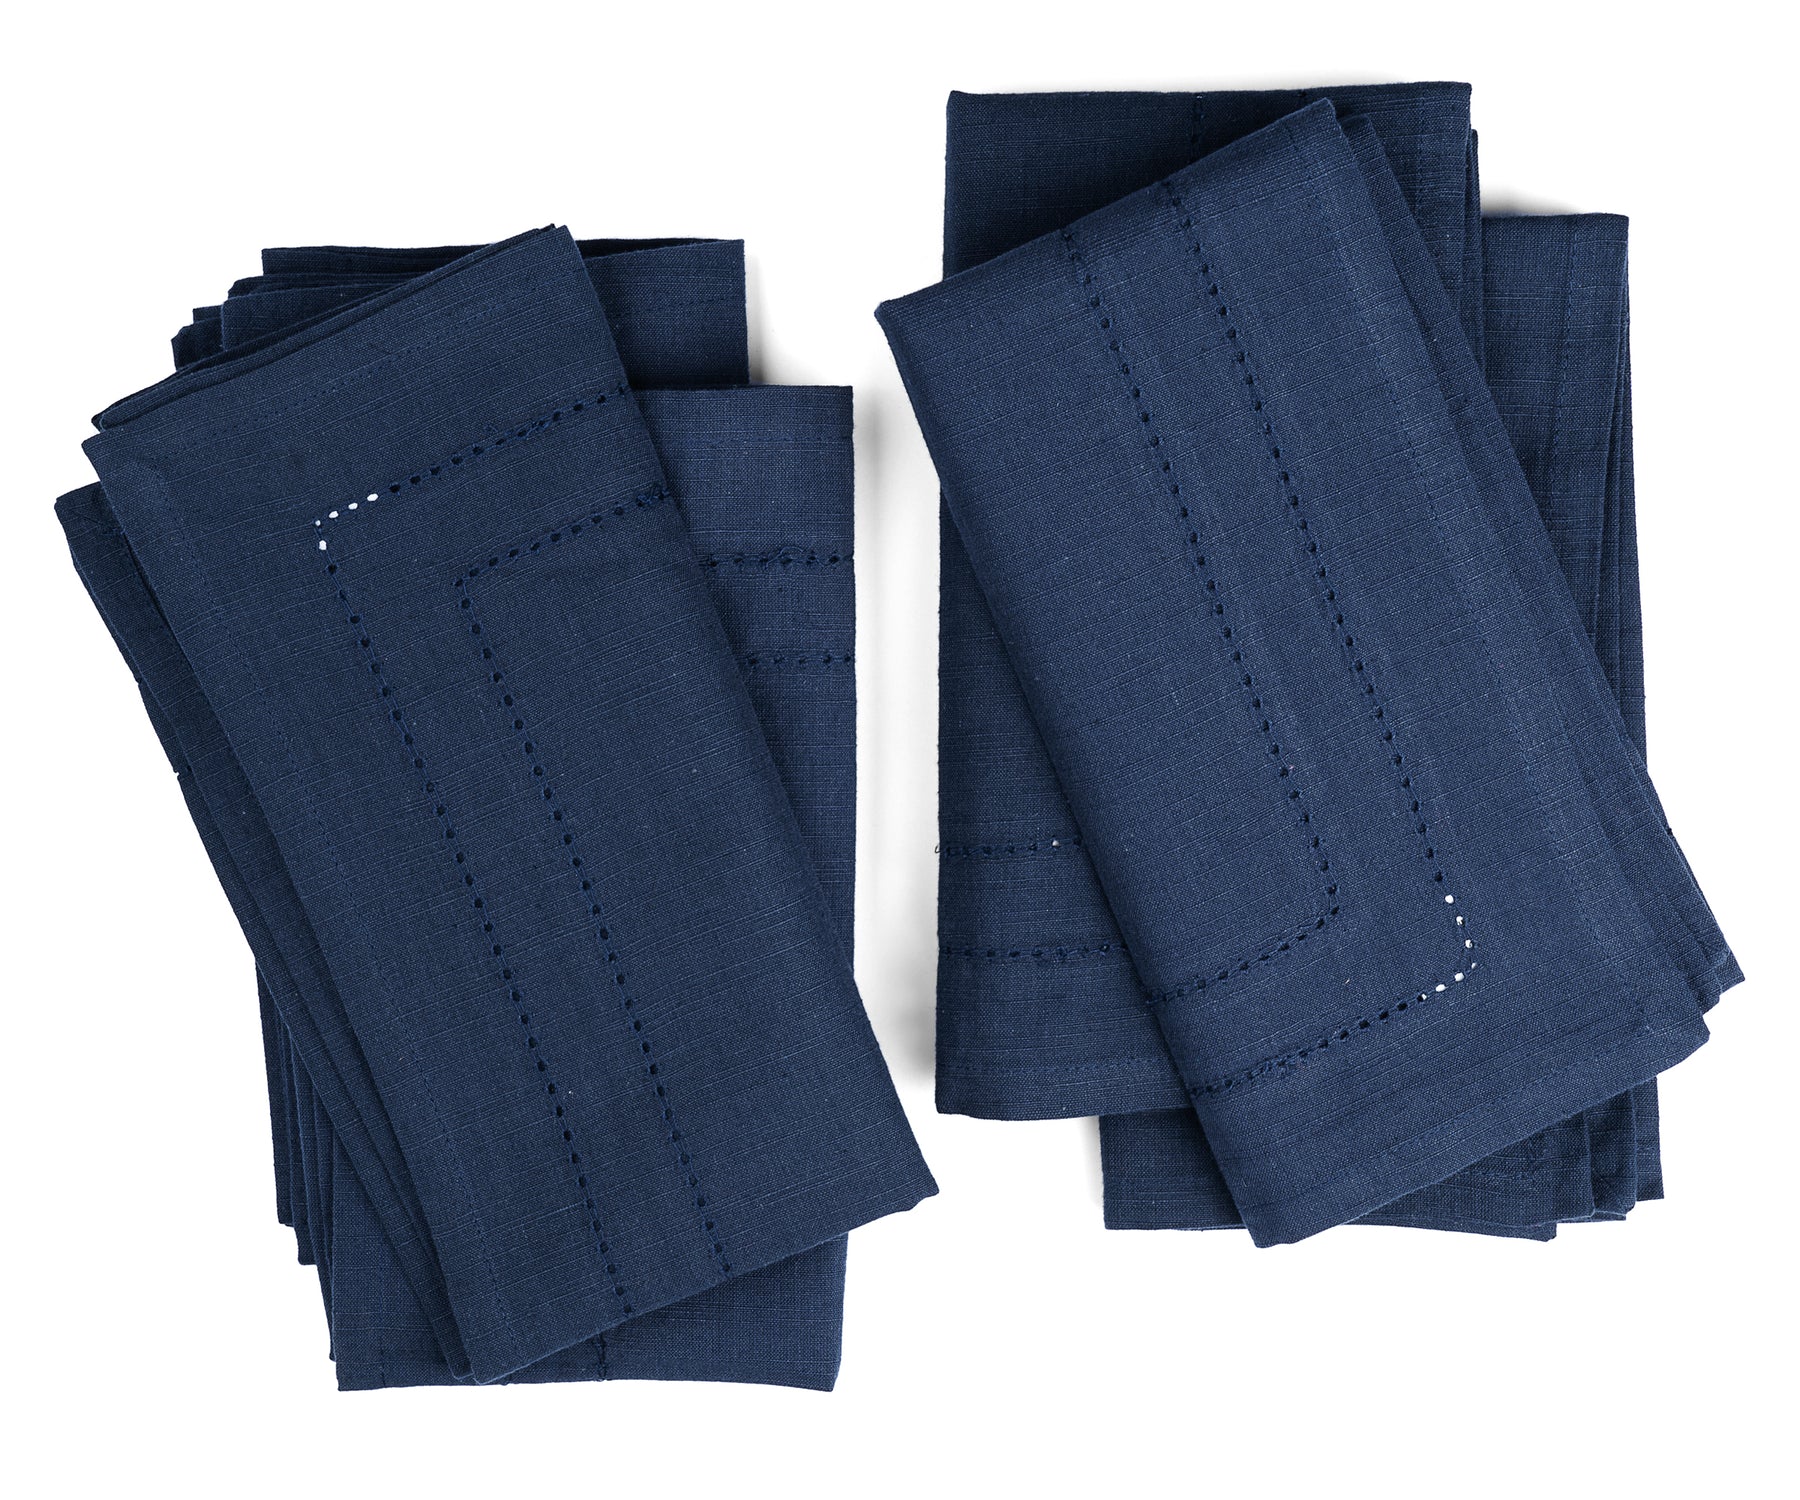 Detail view of navy blue double hemstitch cloth napkins with intricate stitching